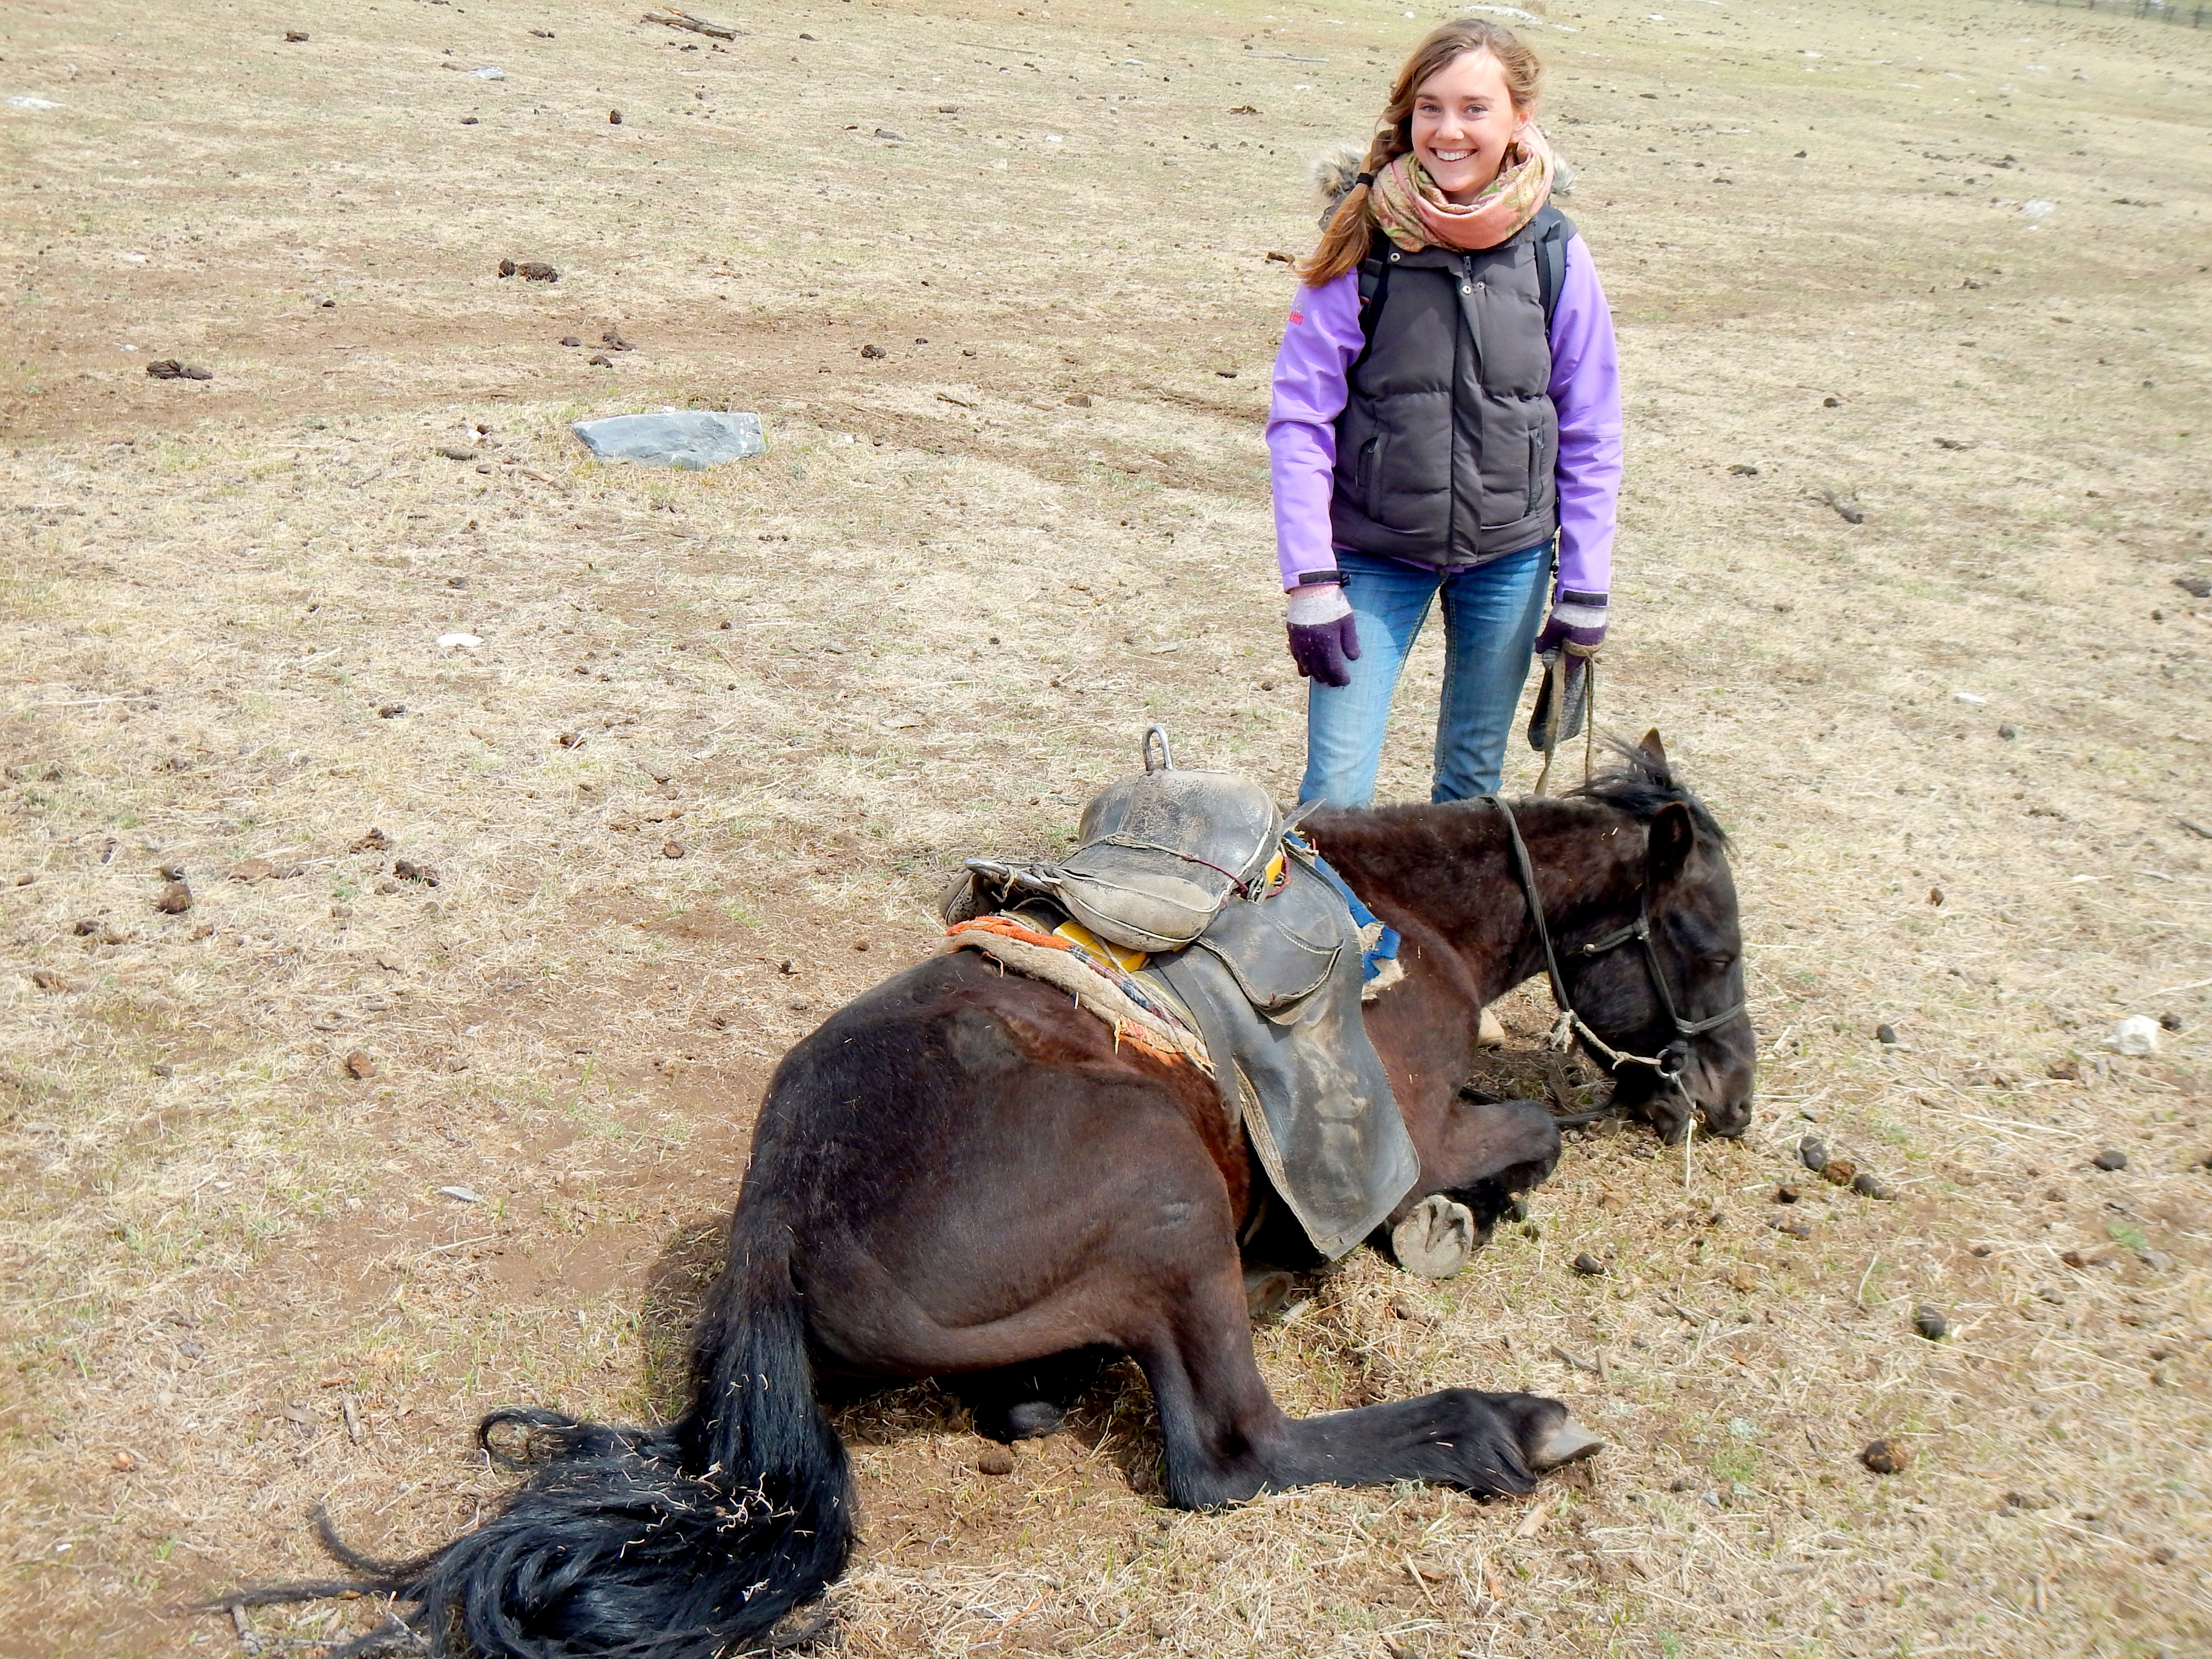 When your horse decides he's done walking, and you don't really know what to do. Horse-trekking in Northern Mongolia.